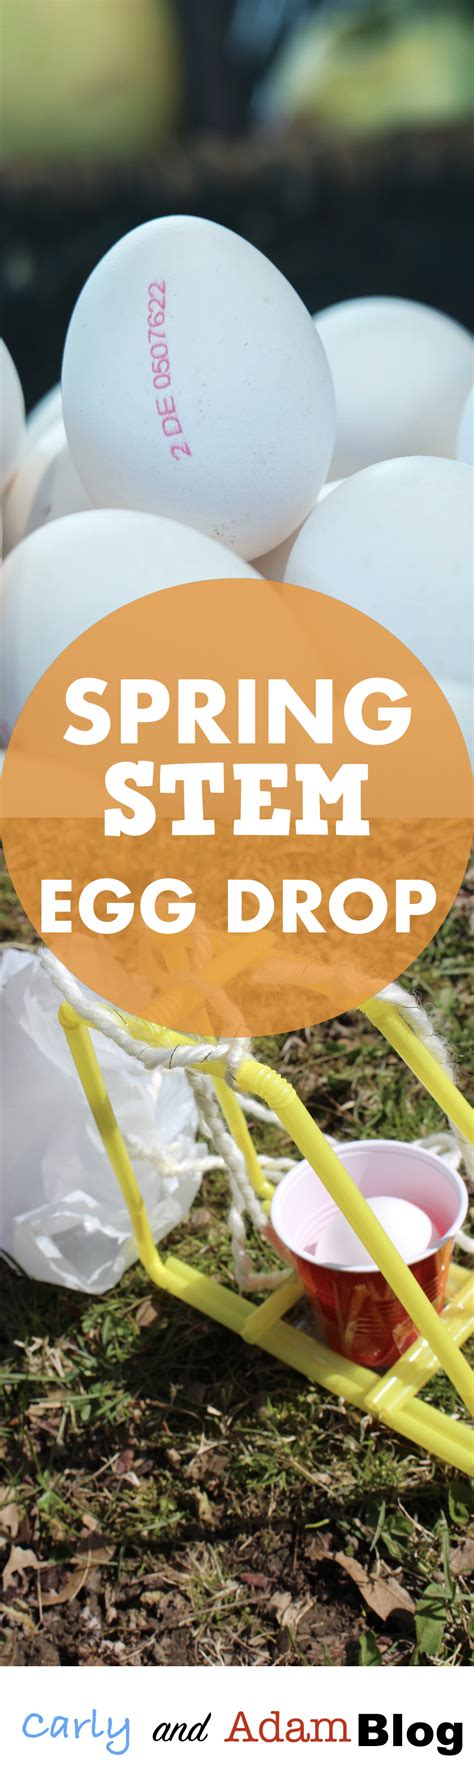 some eggs in plastic bags with the words spring stem egg drop